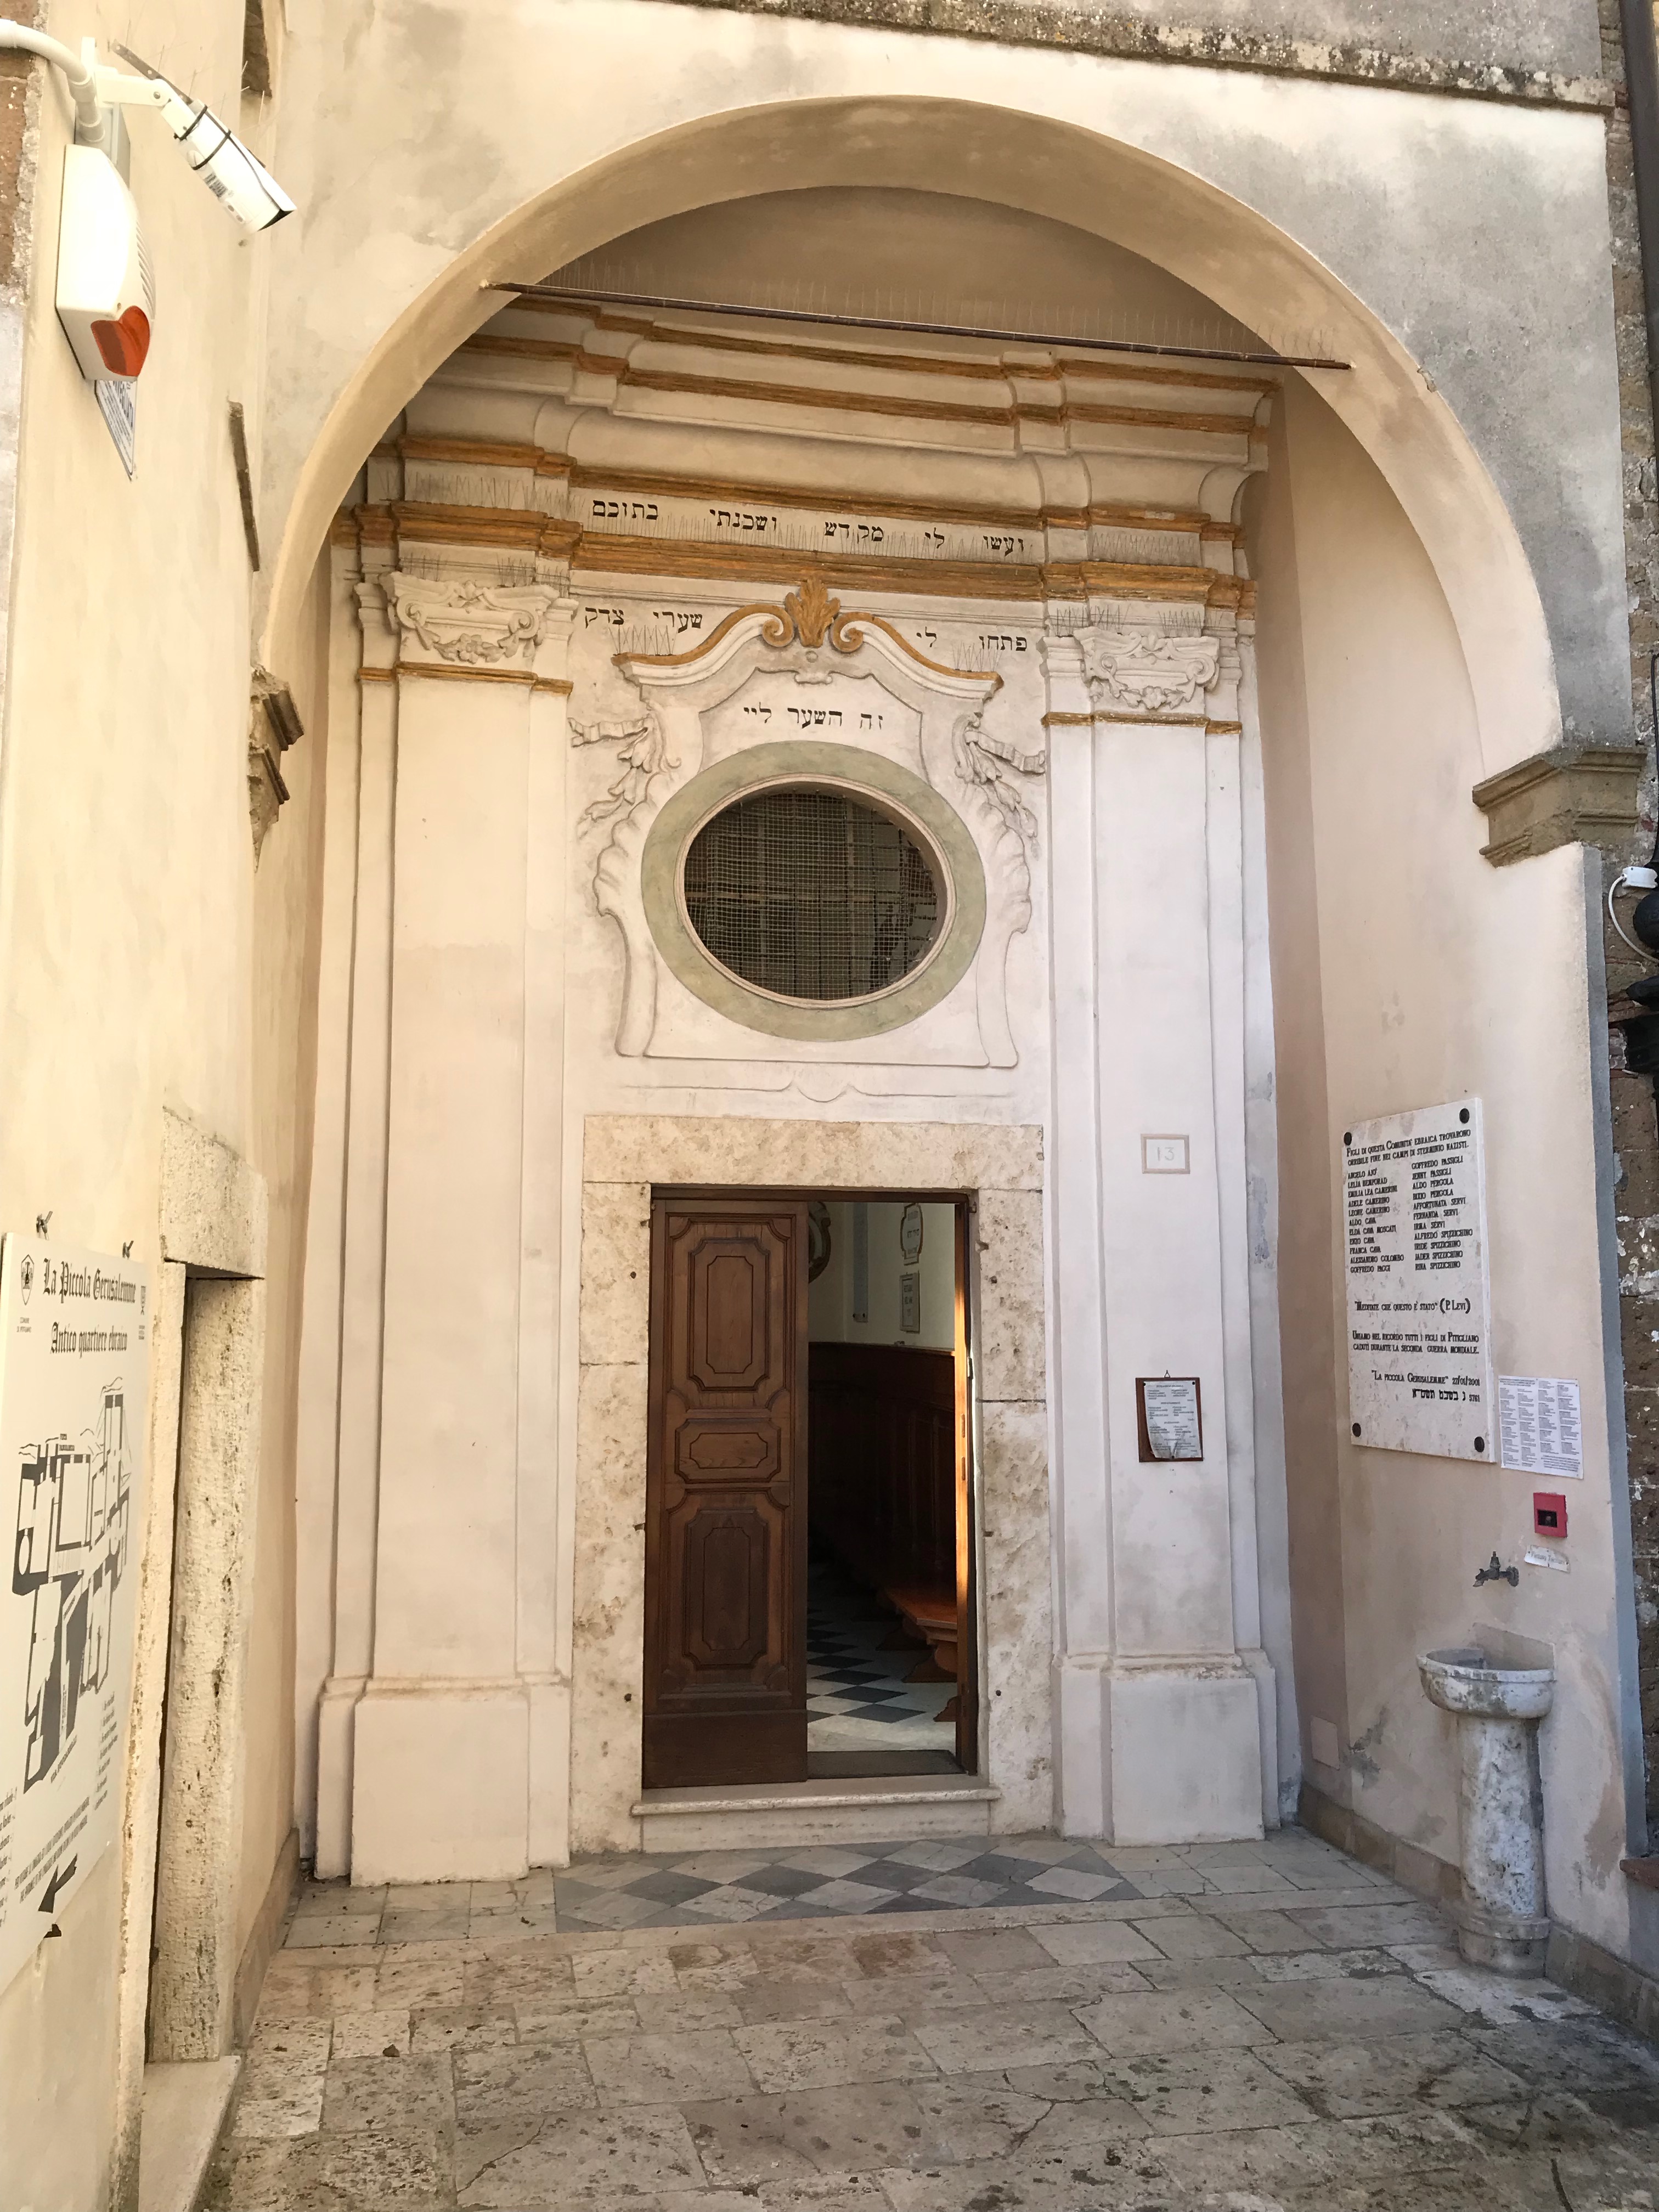 The front door of the Pitigliano Synagogue